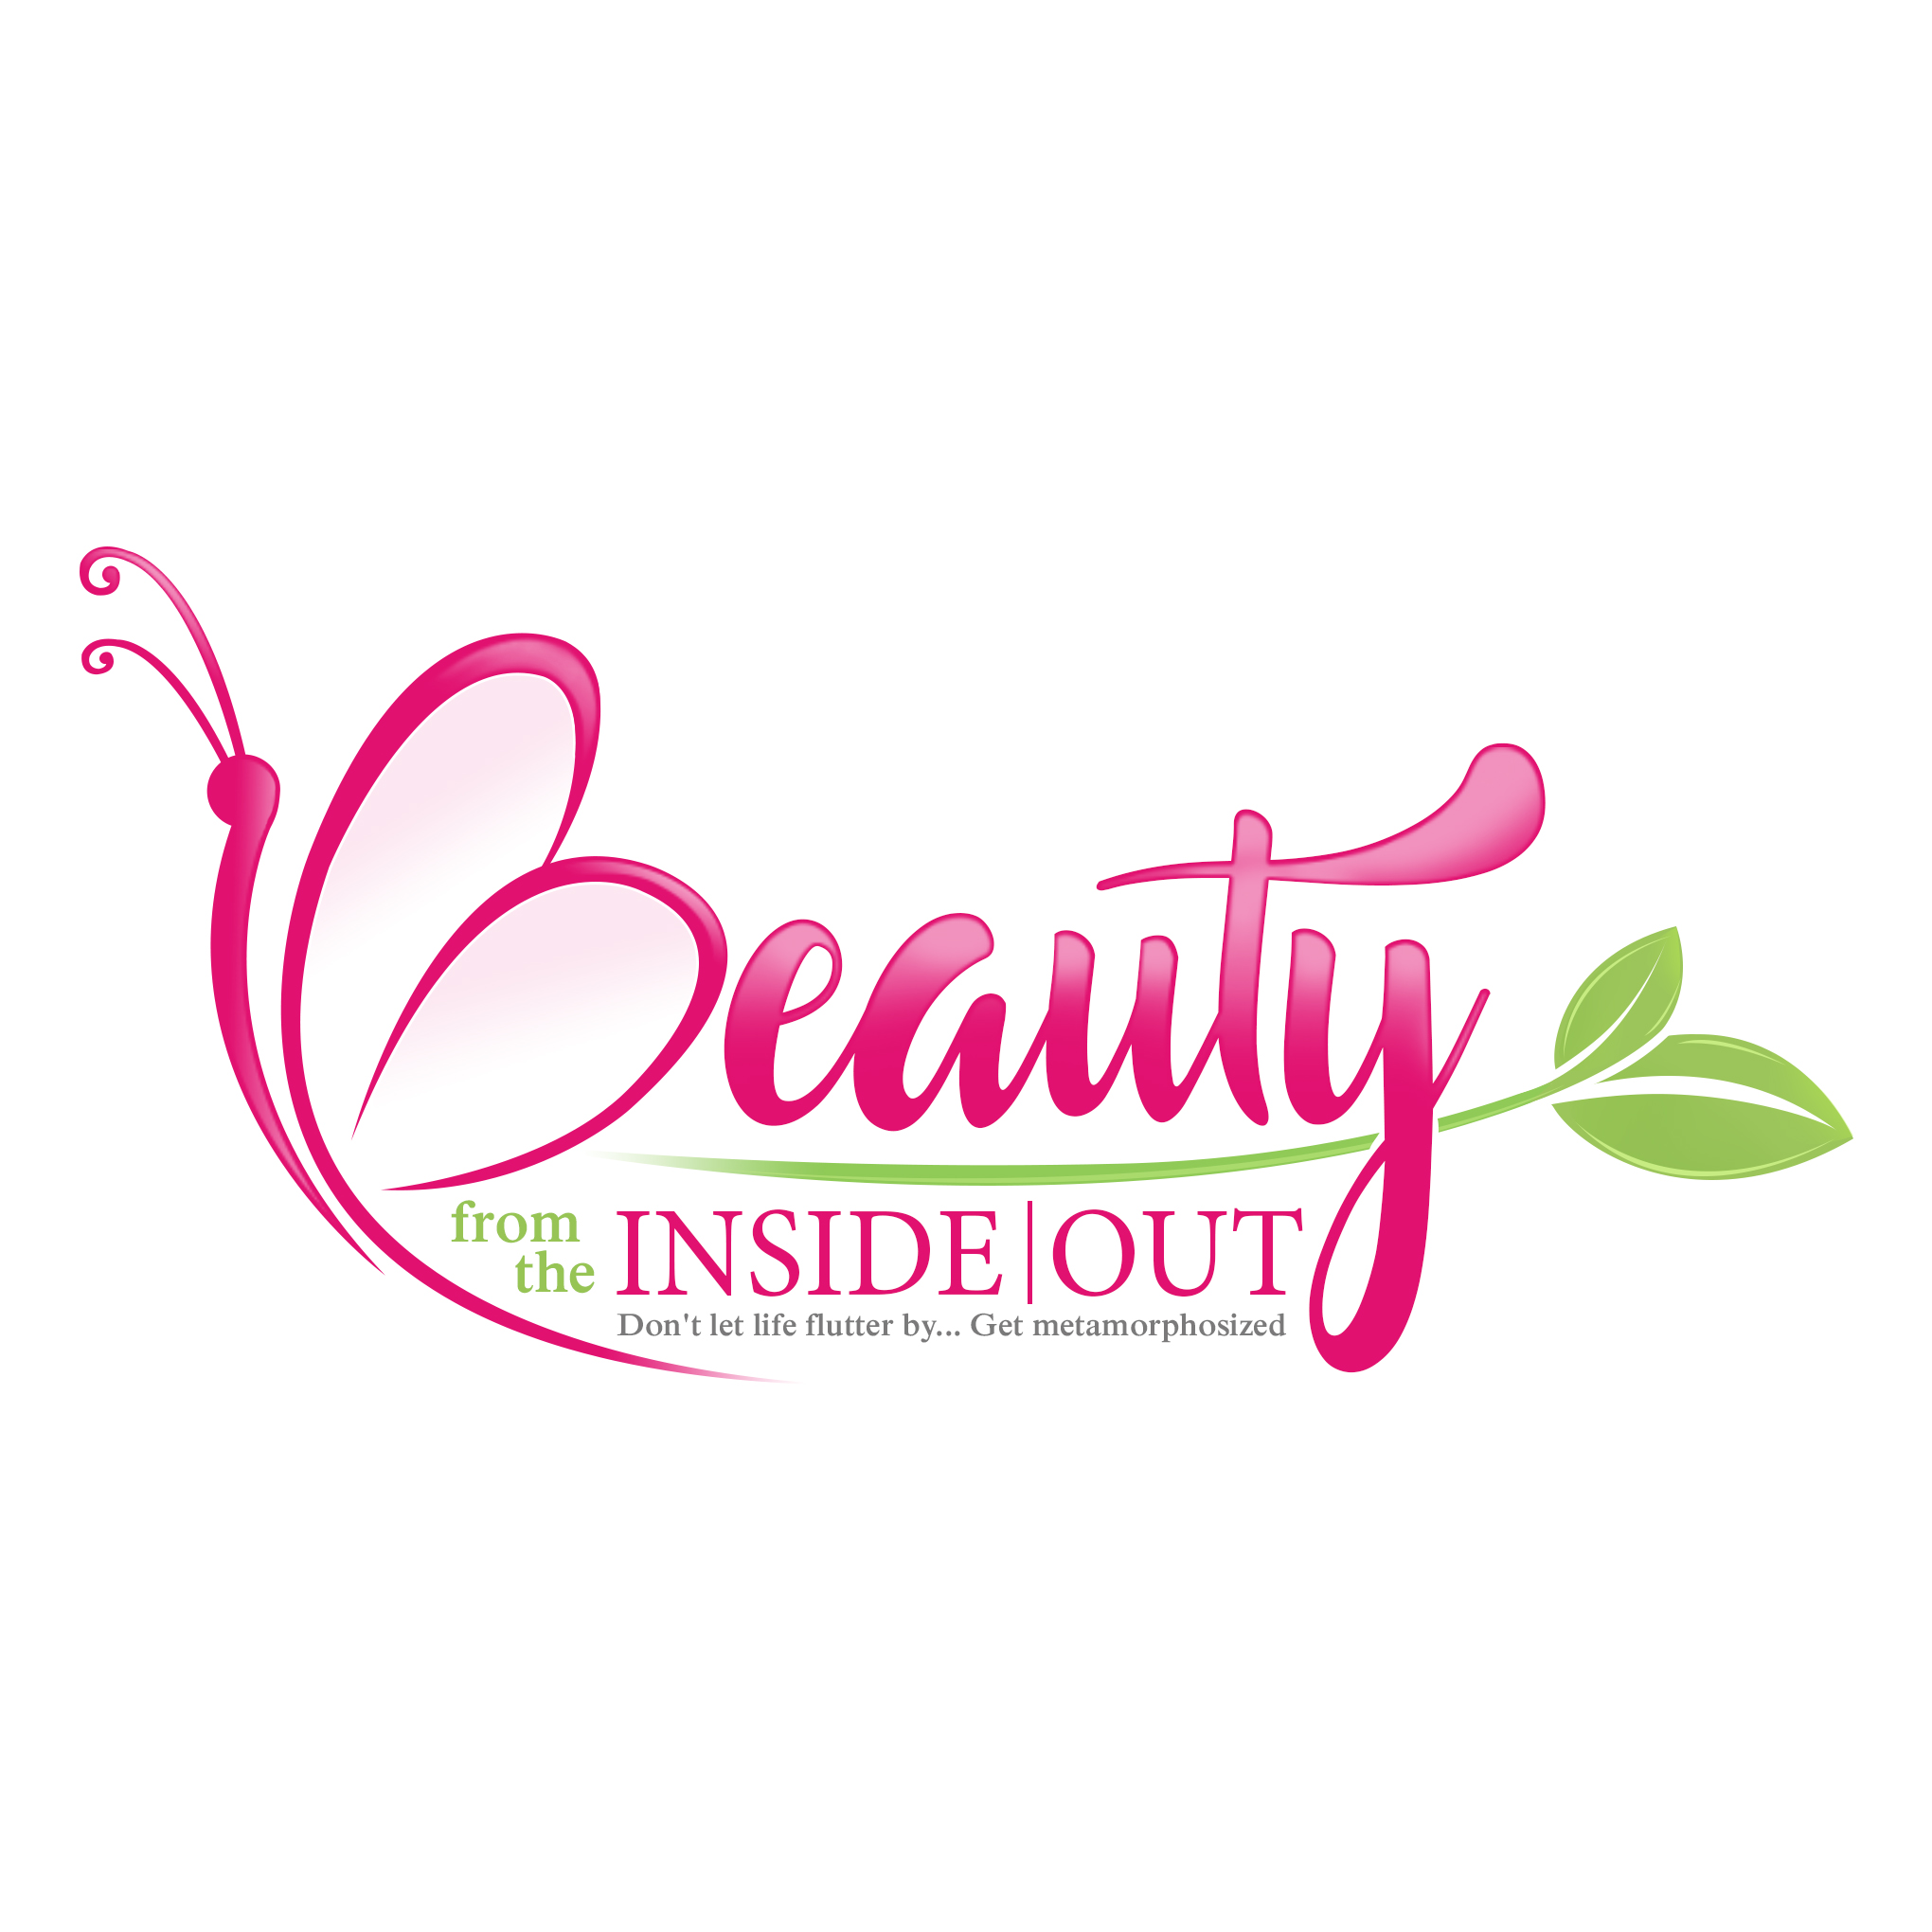 beauty from the inside out logo